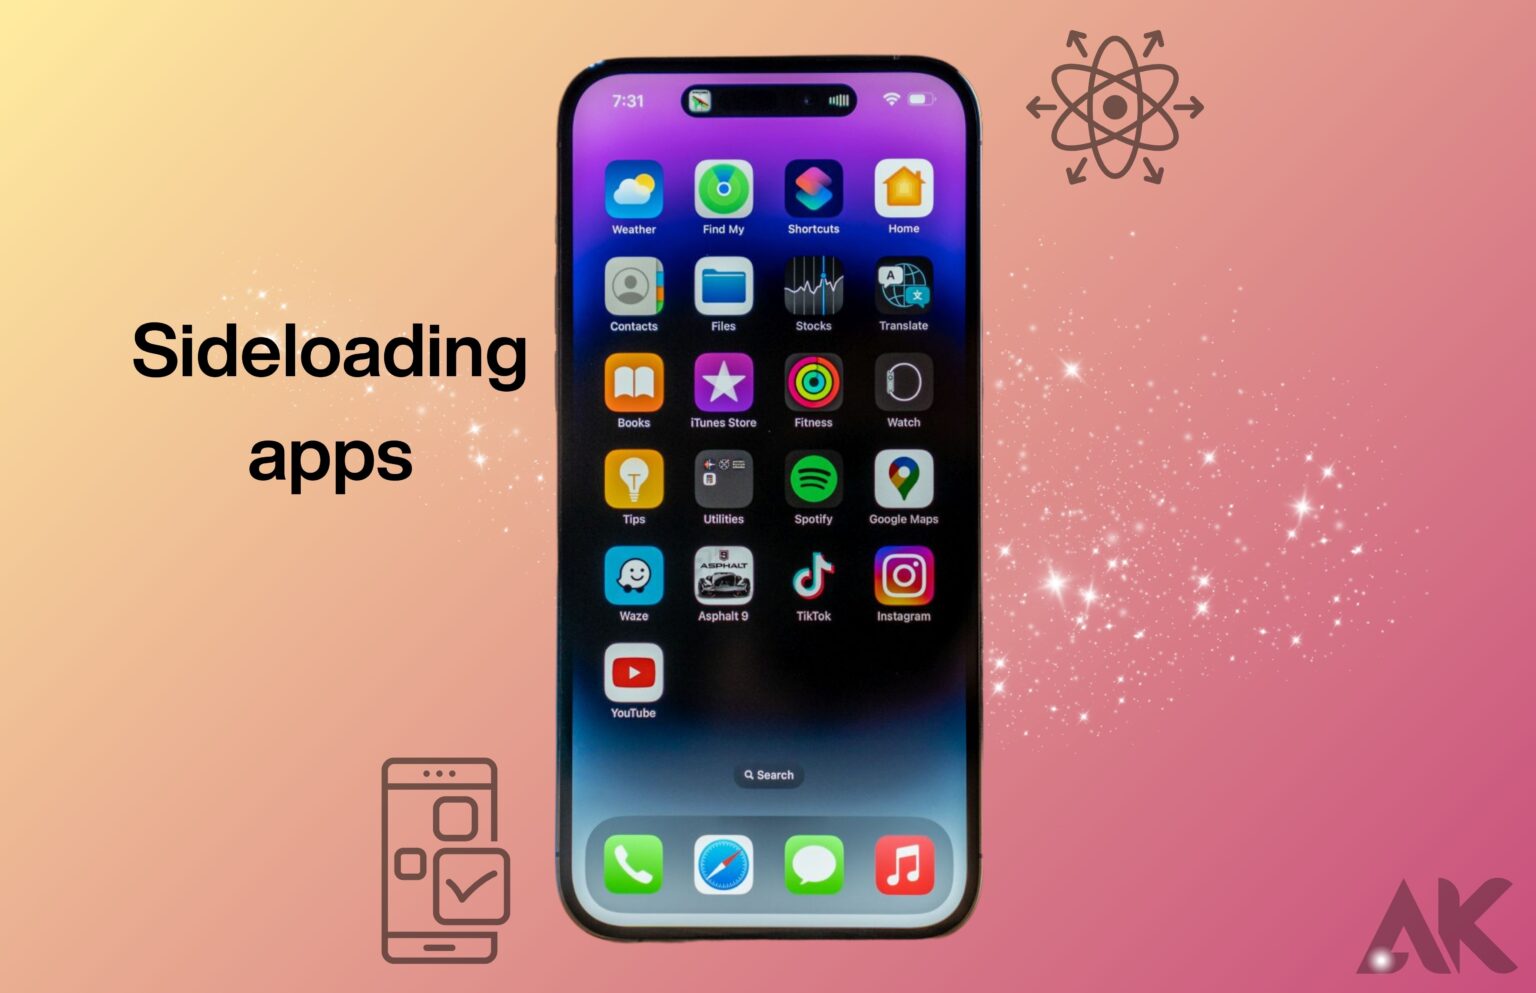 Sideloading apps on an iPhone: is it finally possible?